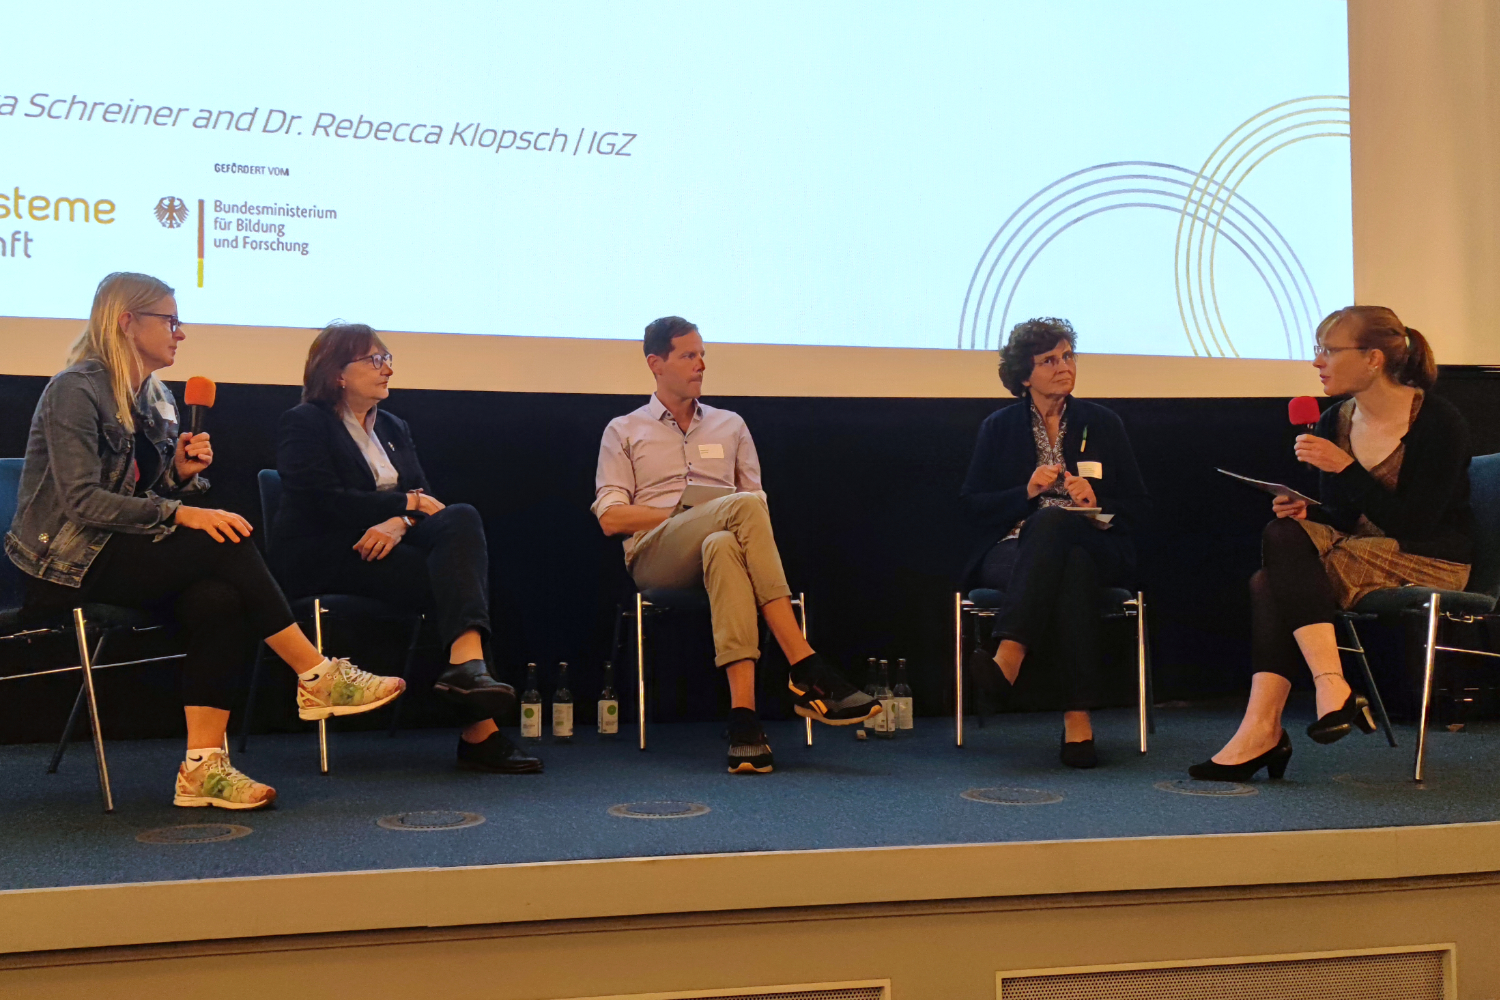 From left: Monika Schreiner, Christine Lang, Matthias Lech, Sabine Kulling and Rebecca Klopsch during the panel discussion at the first “Agricultural Systems of the Future Summit” in Berlin.